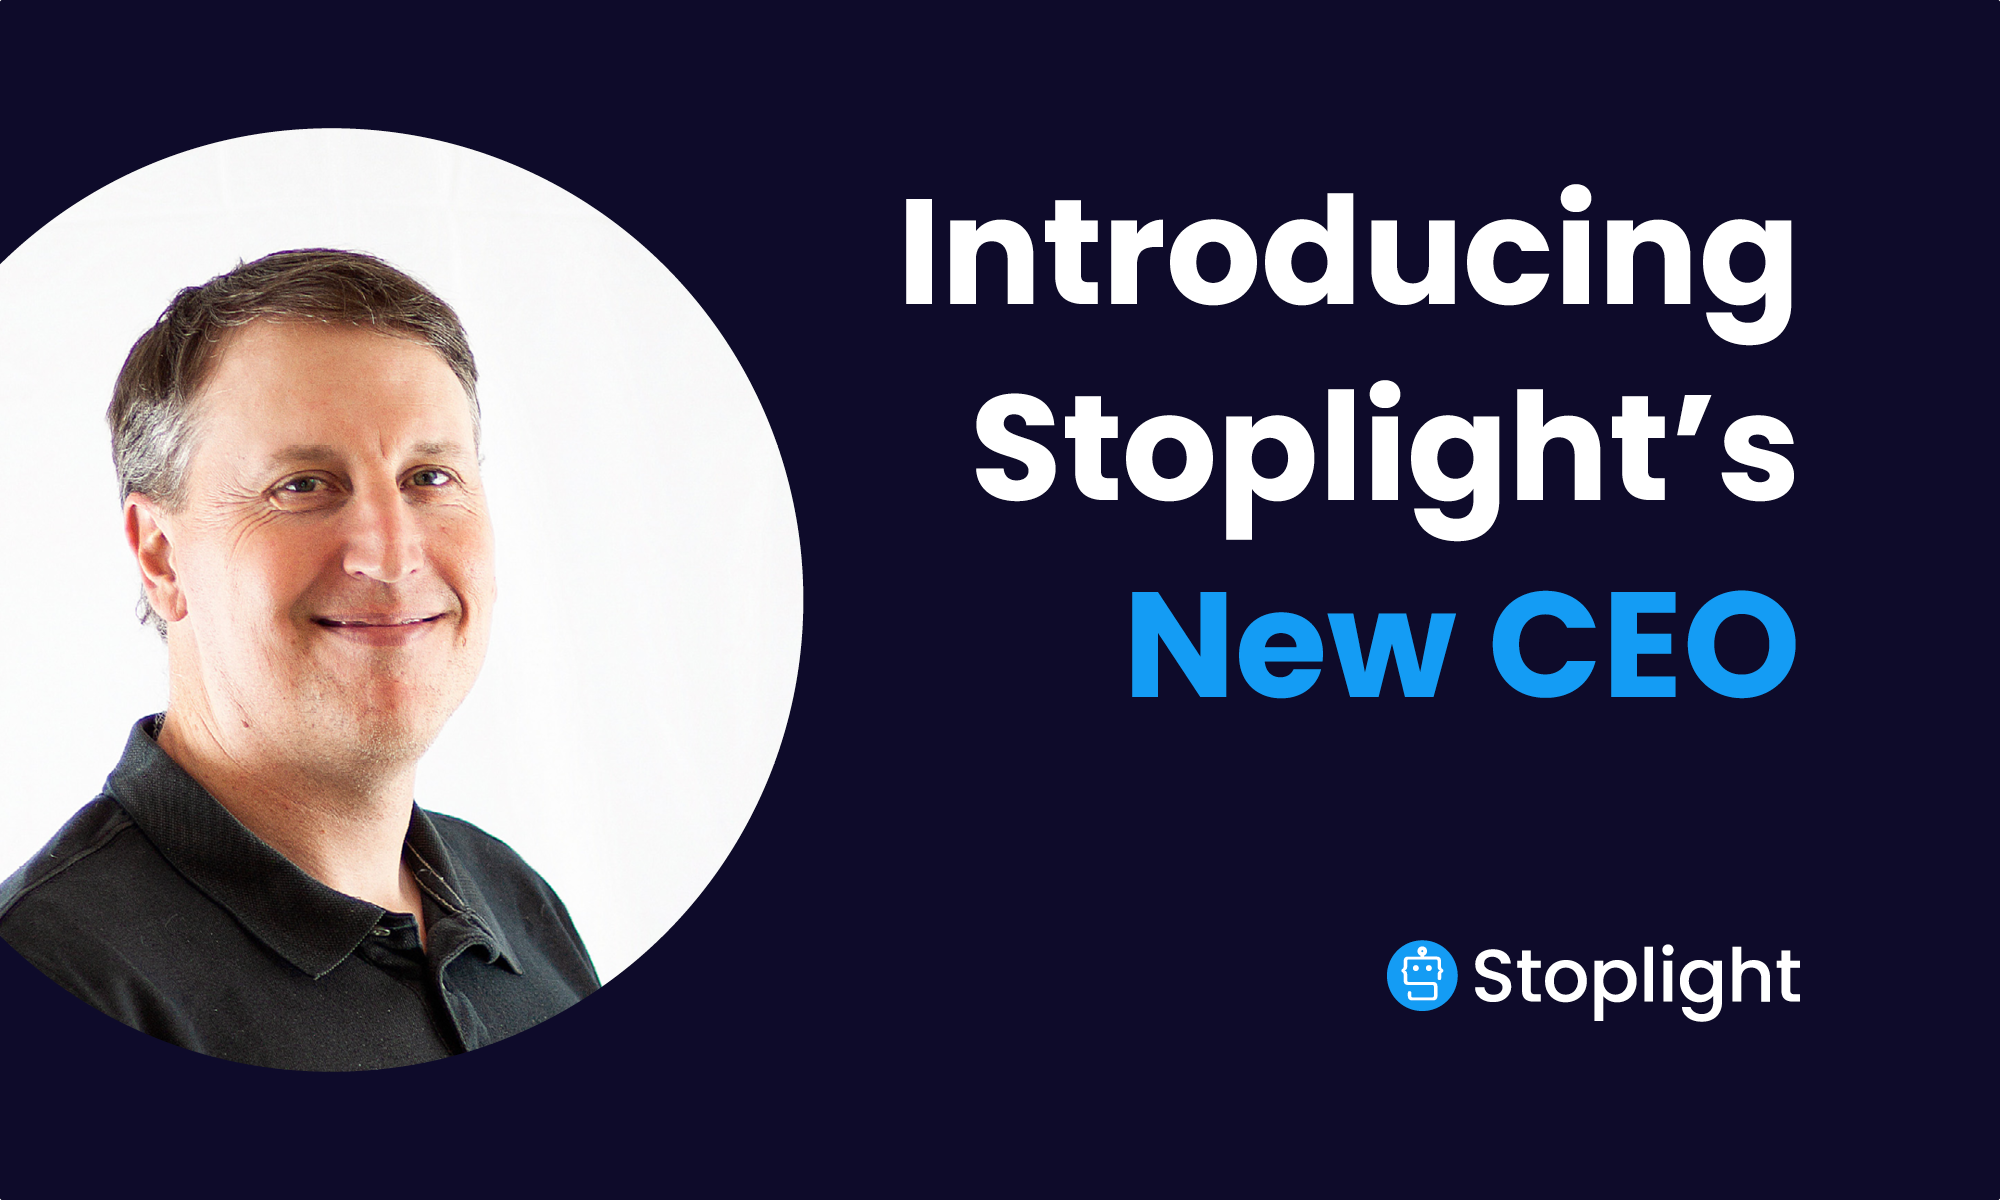 Introducing Stoplight’s New CEO